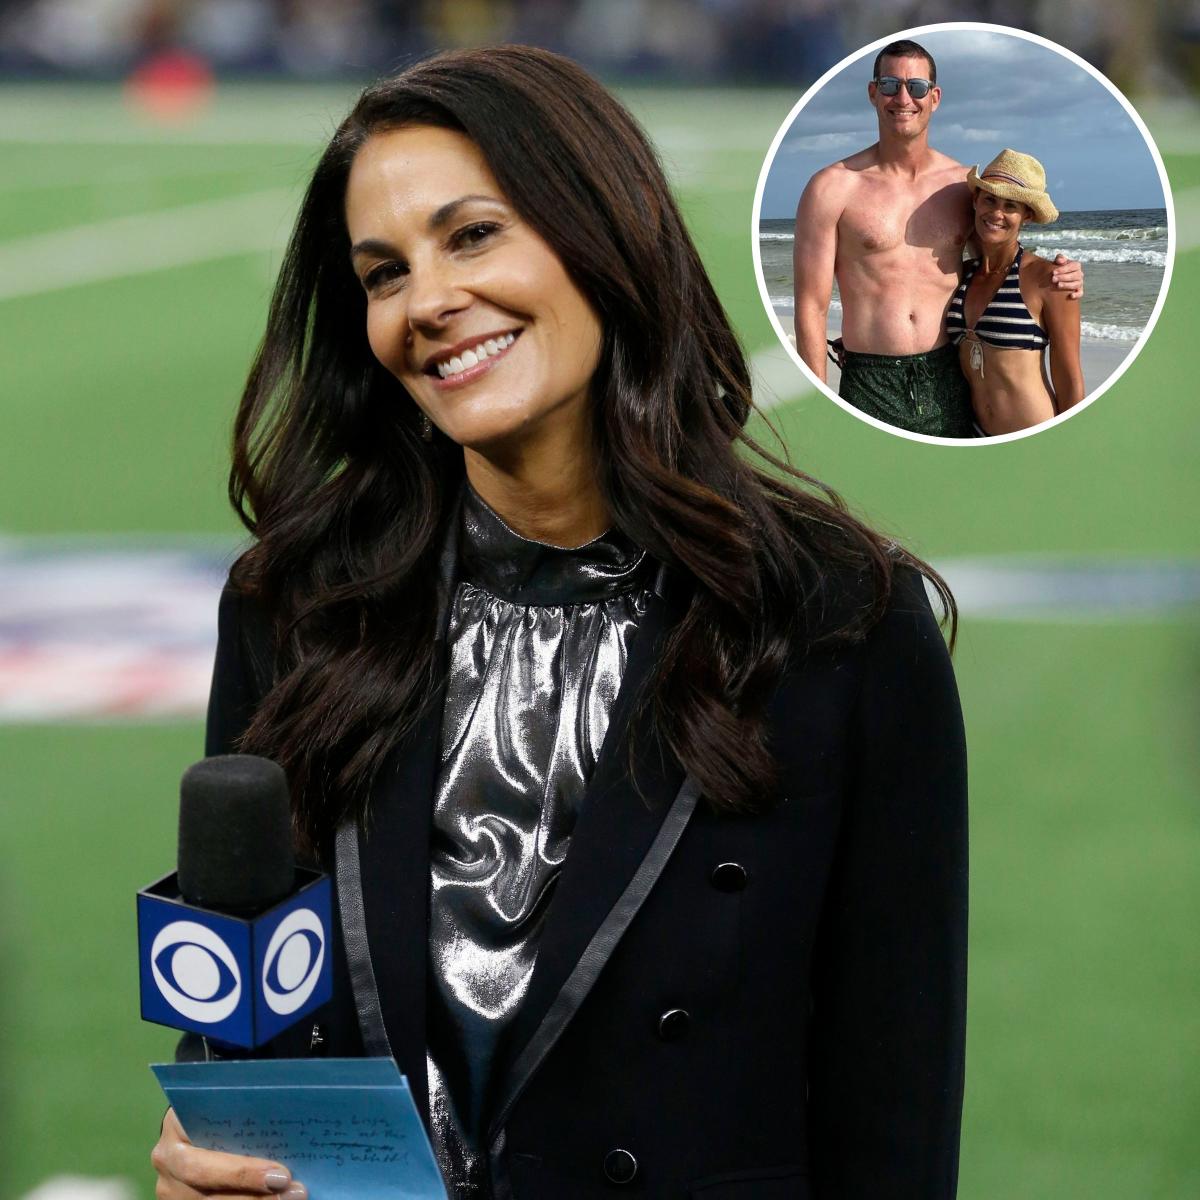 derrick alderman recommends Tracy Wolfson Naked